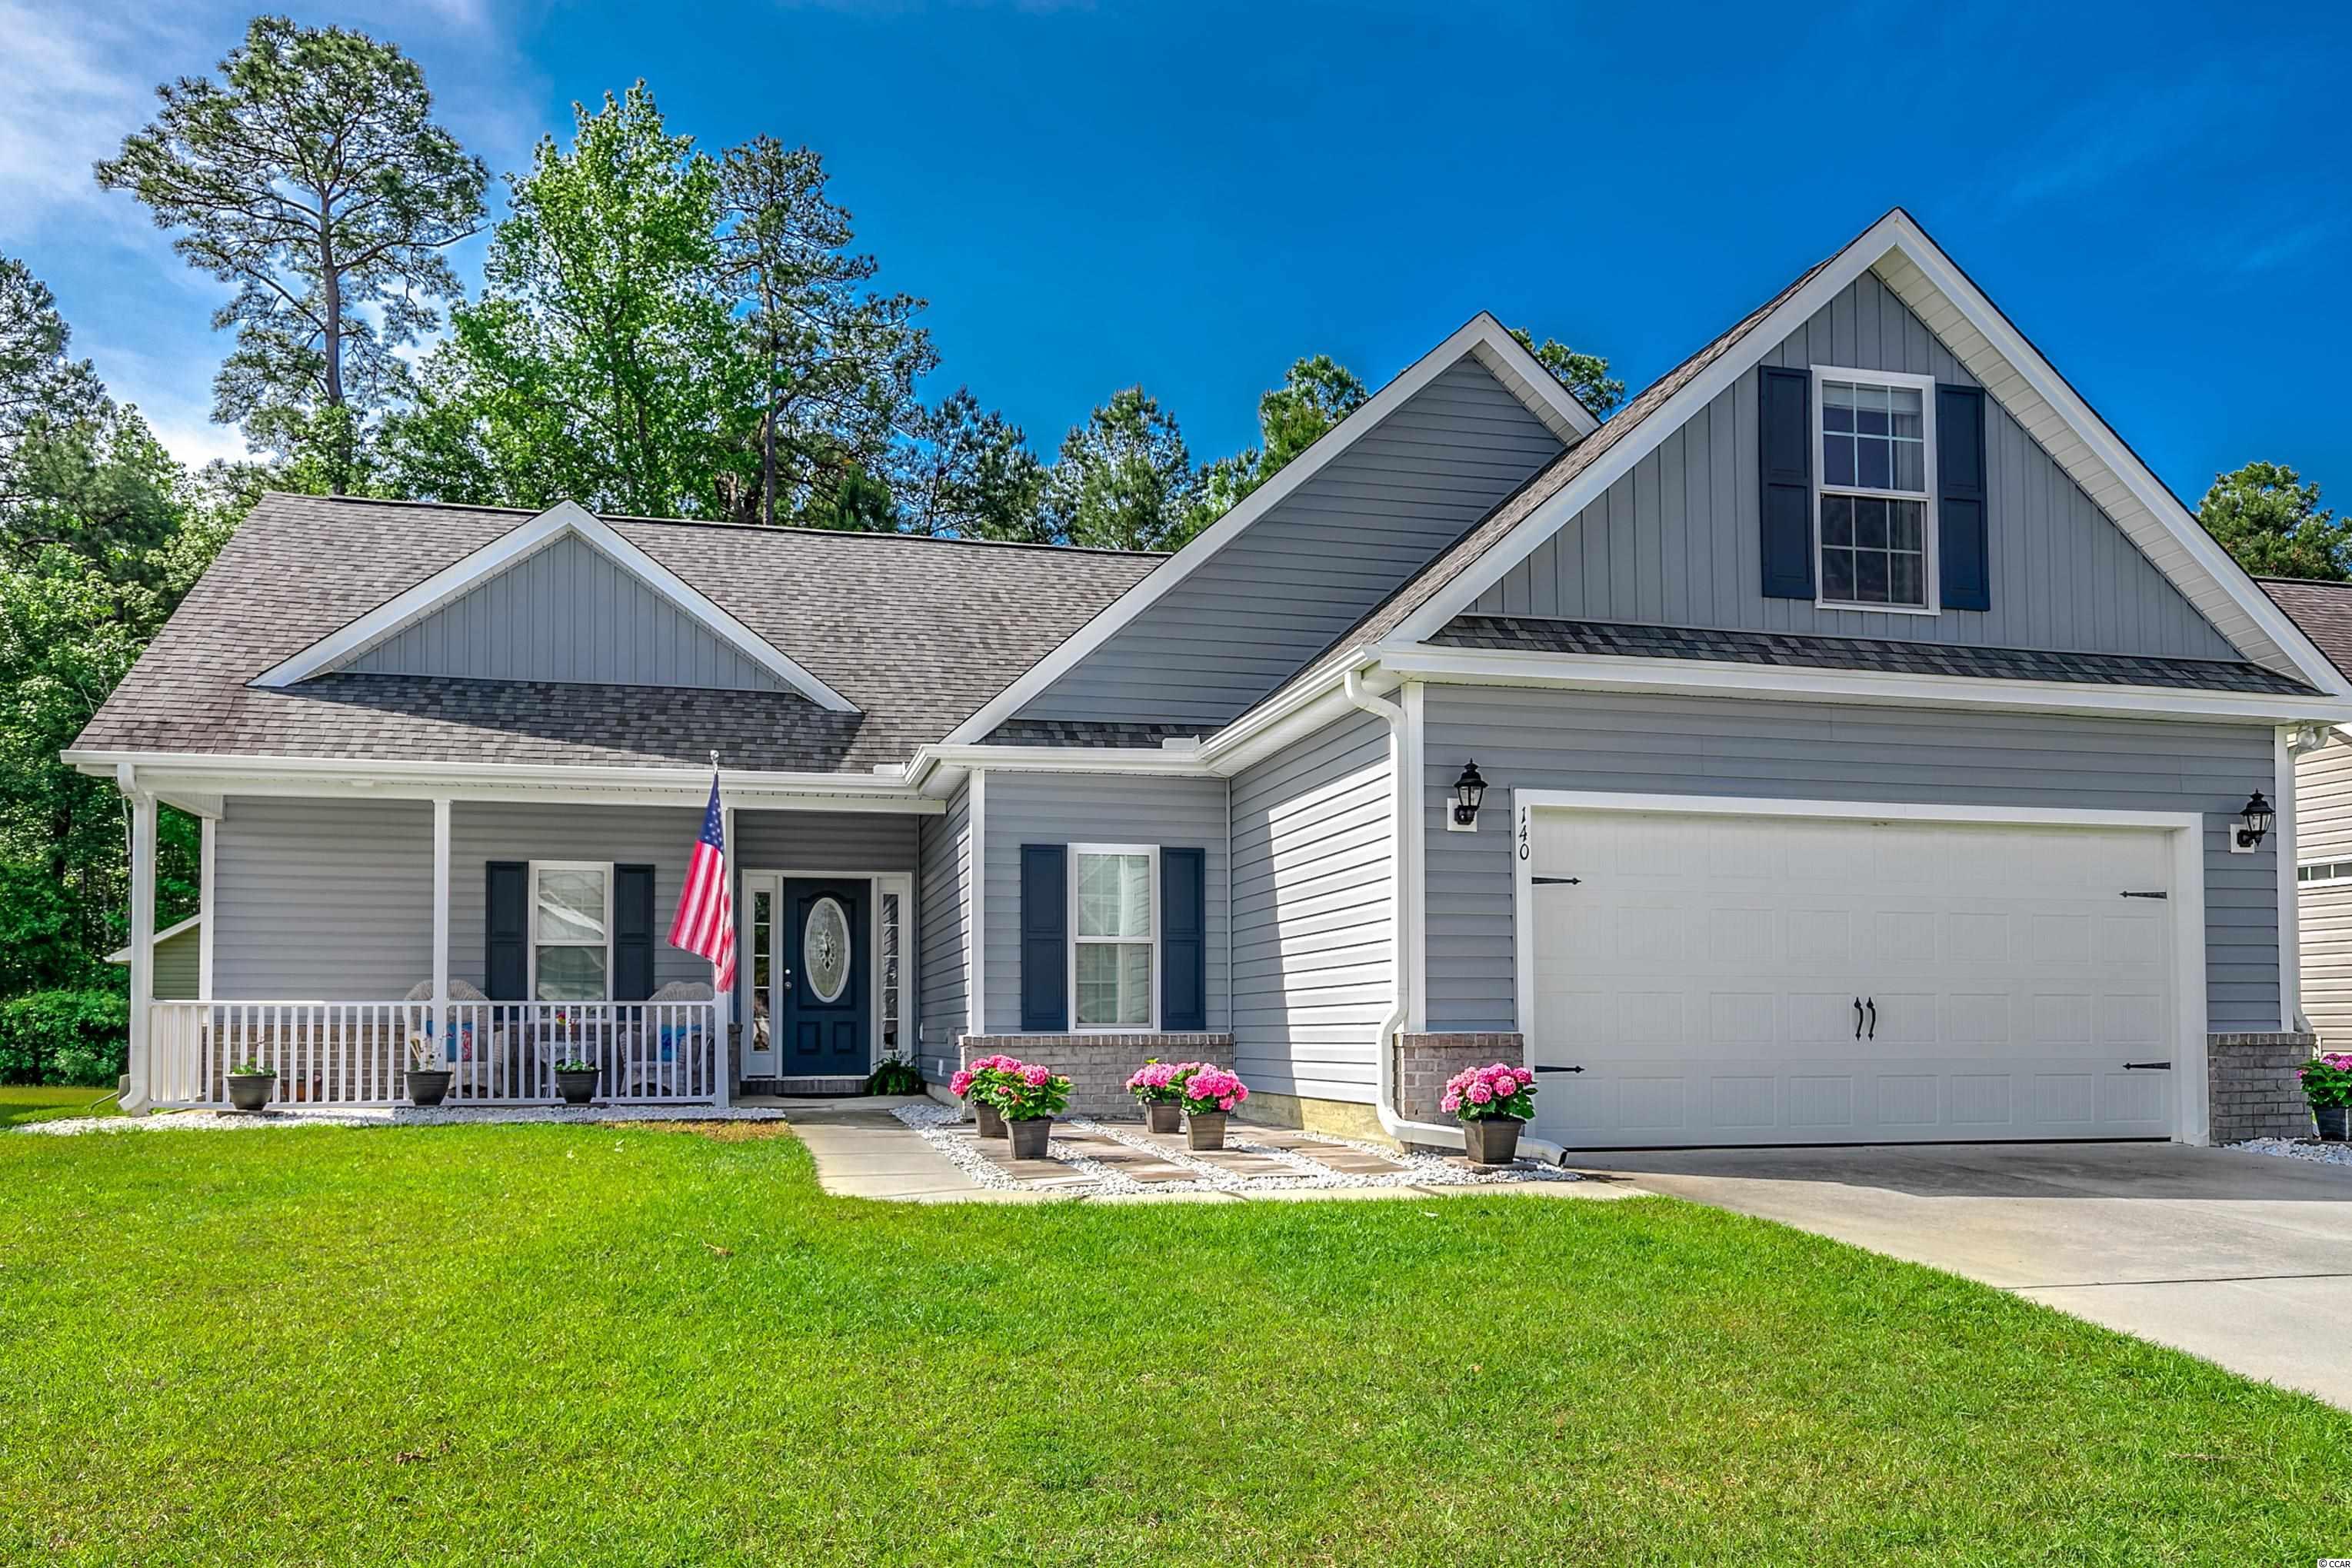 140 Yeomans Dr. Conway, SC 29526